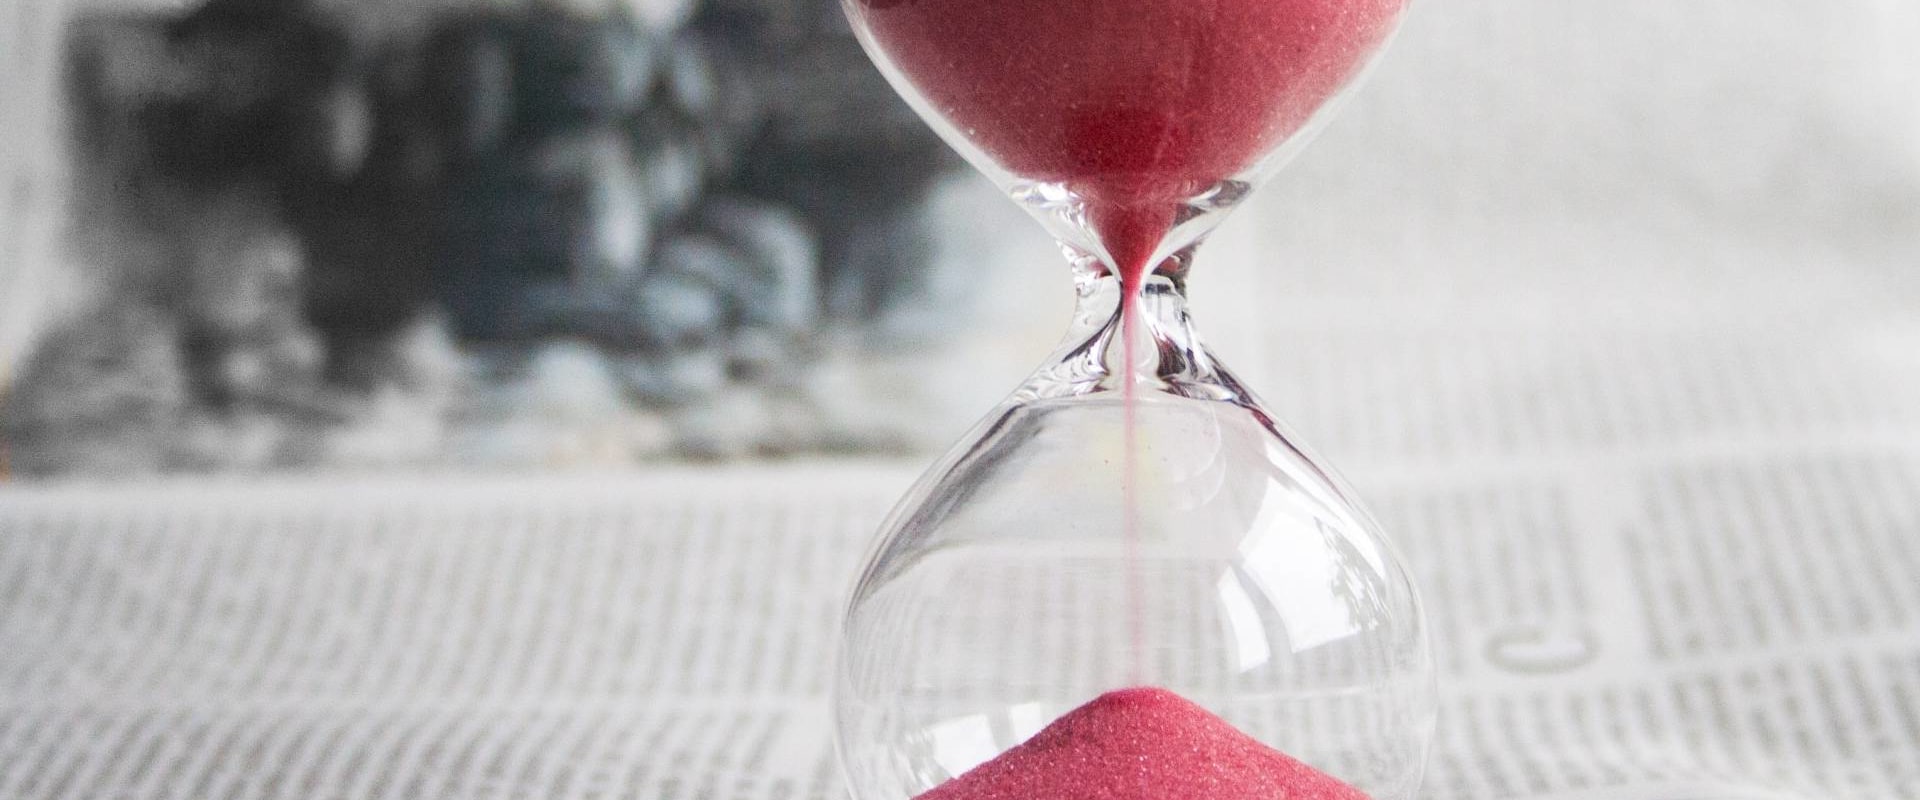 7 Time Management Skills to Help You Achieve Balance and Productivity and Reach Your Goals